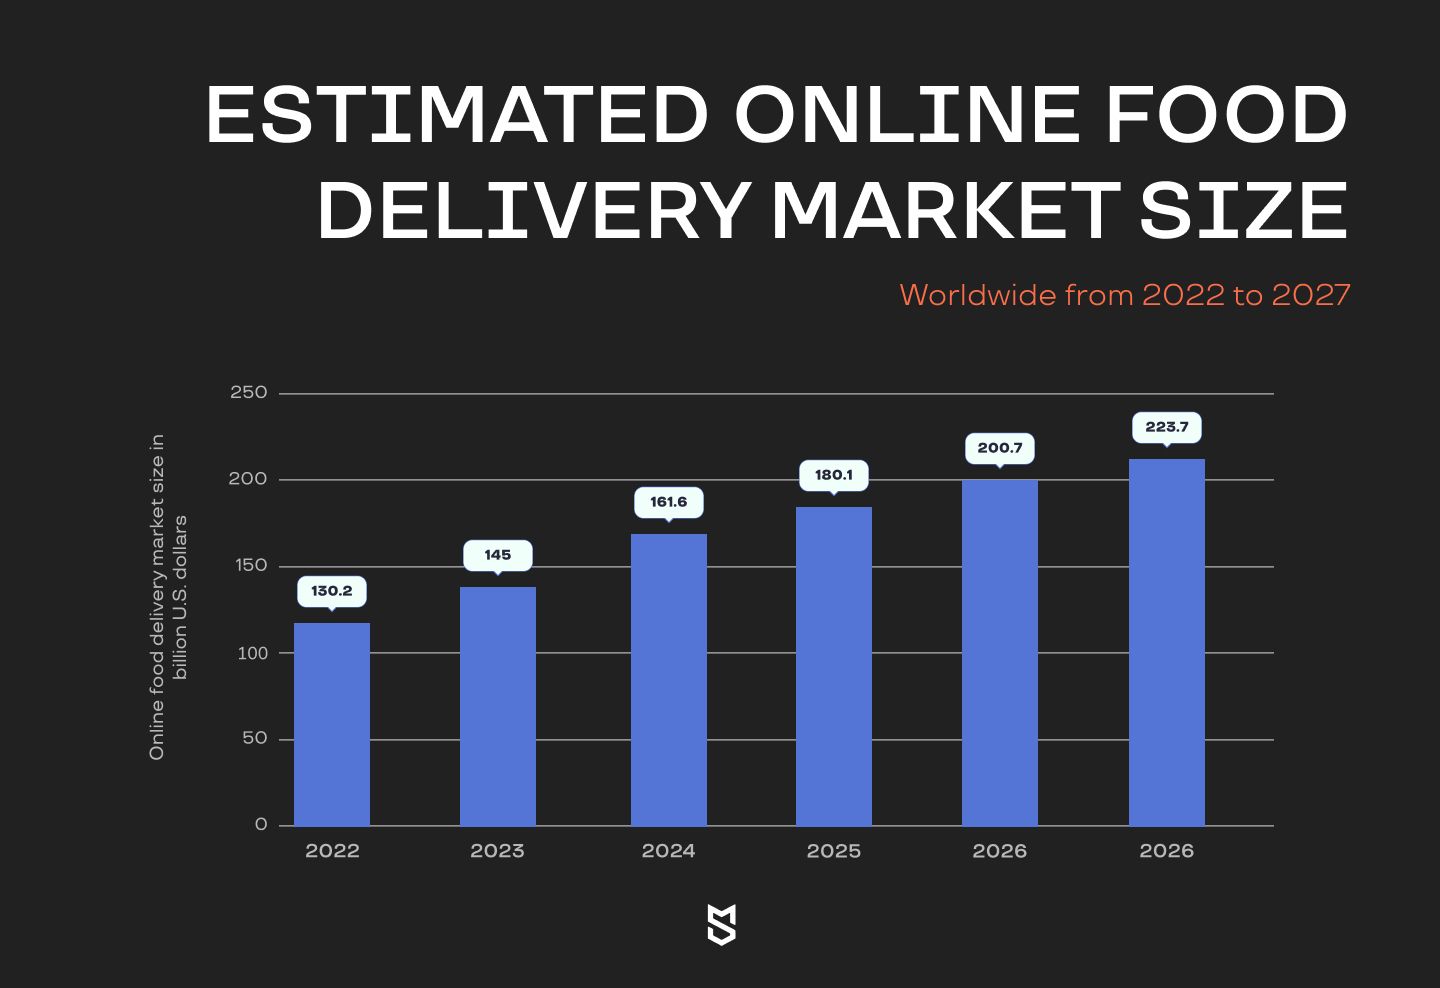 Estimated online food delivery market size worldwide from 2022 to 2027